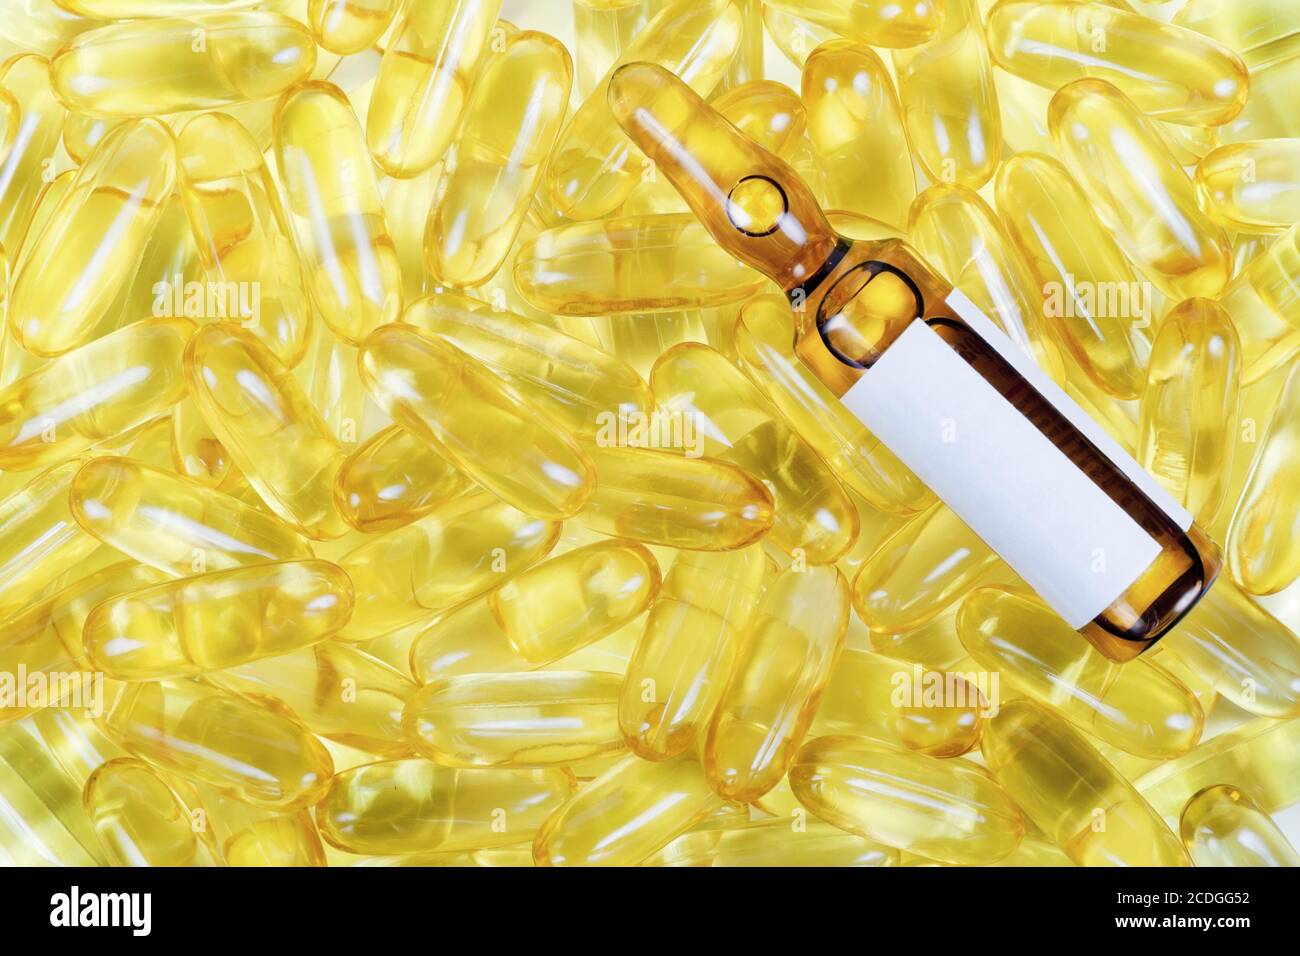 Golden pills and yellow ampoule Stock Photo